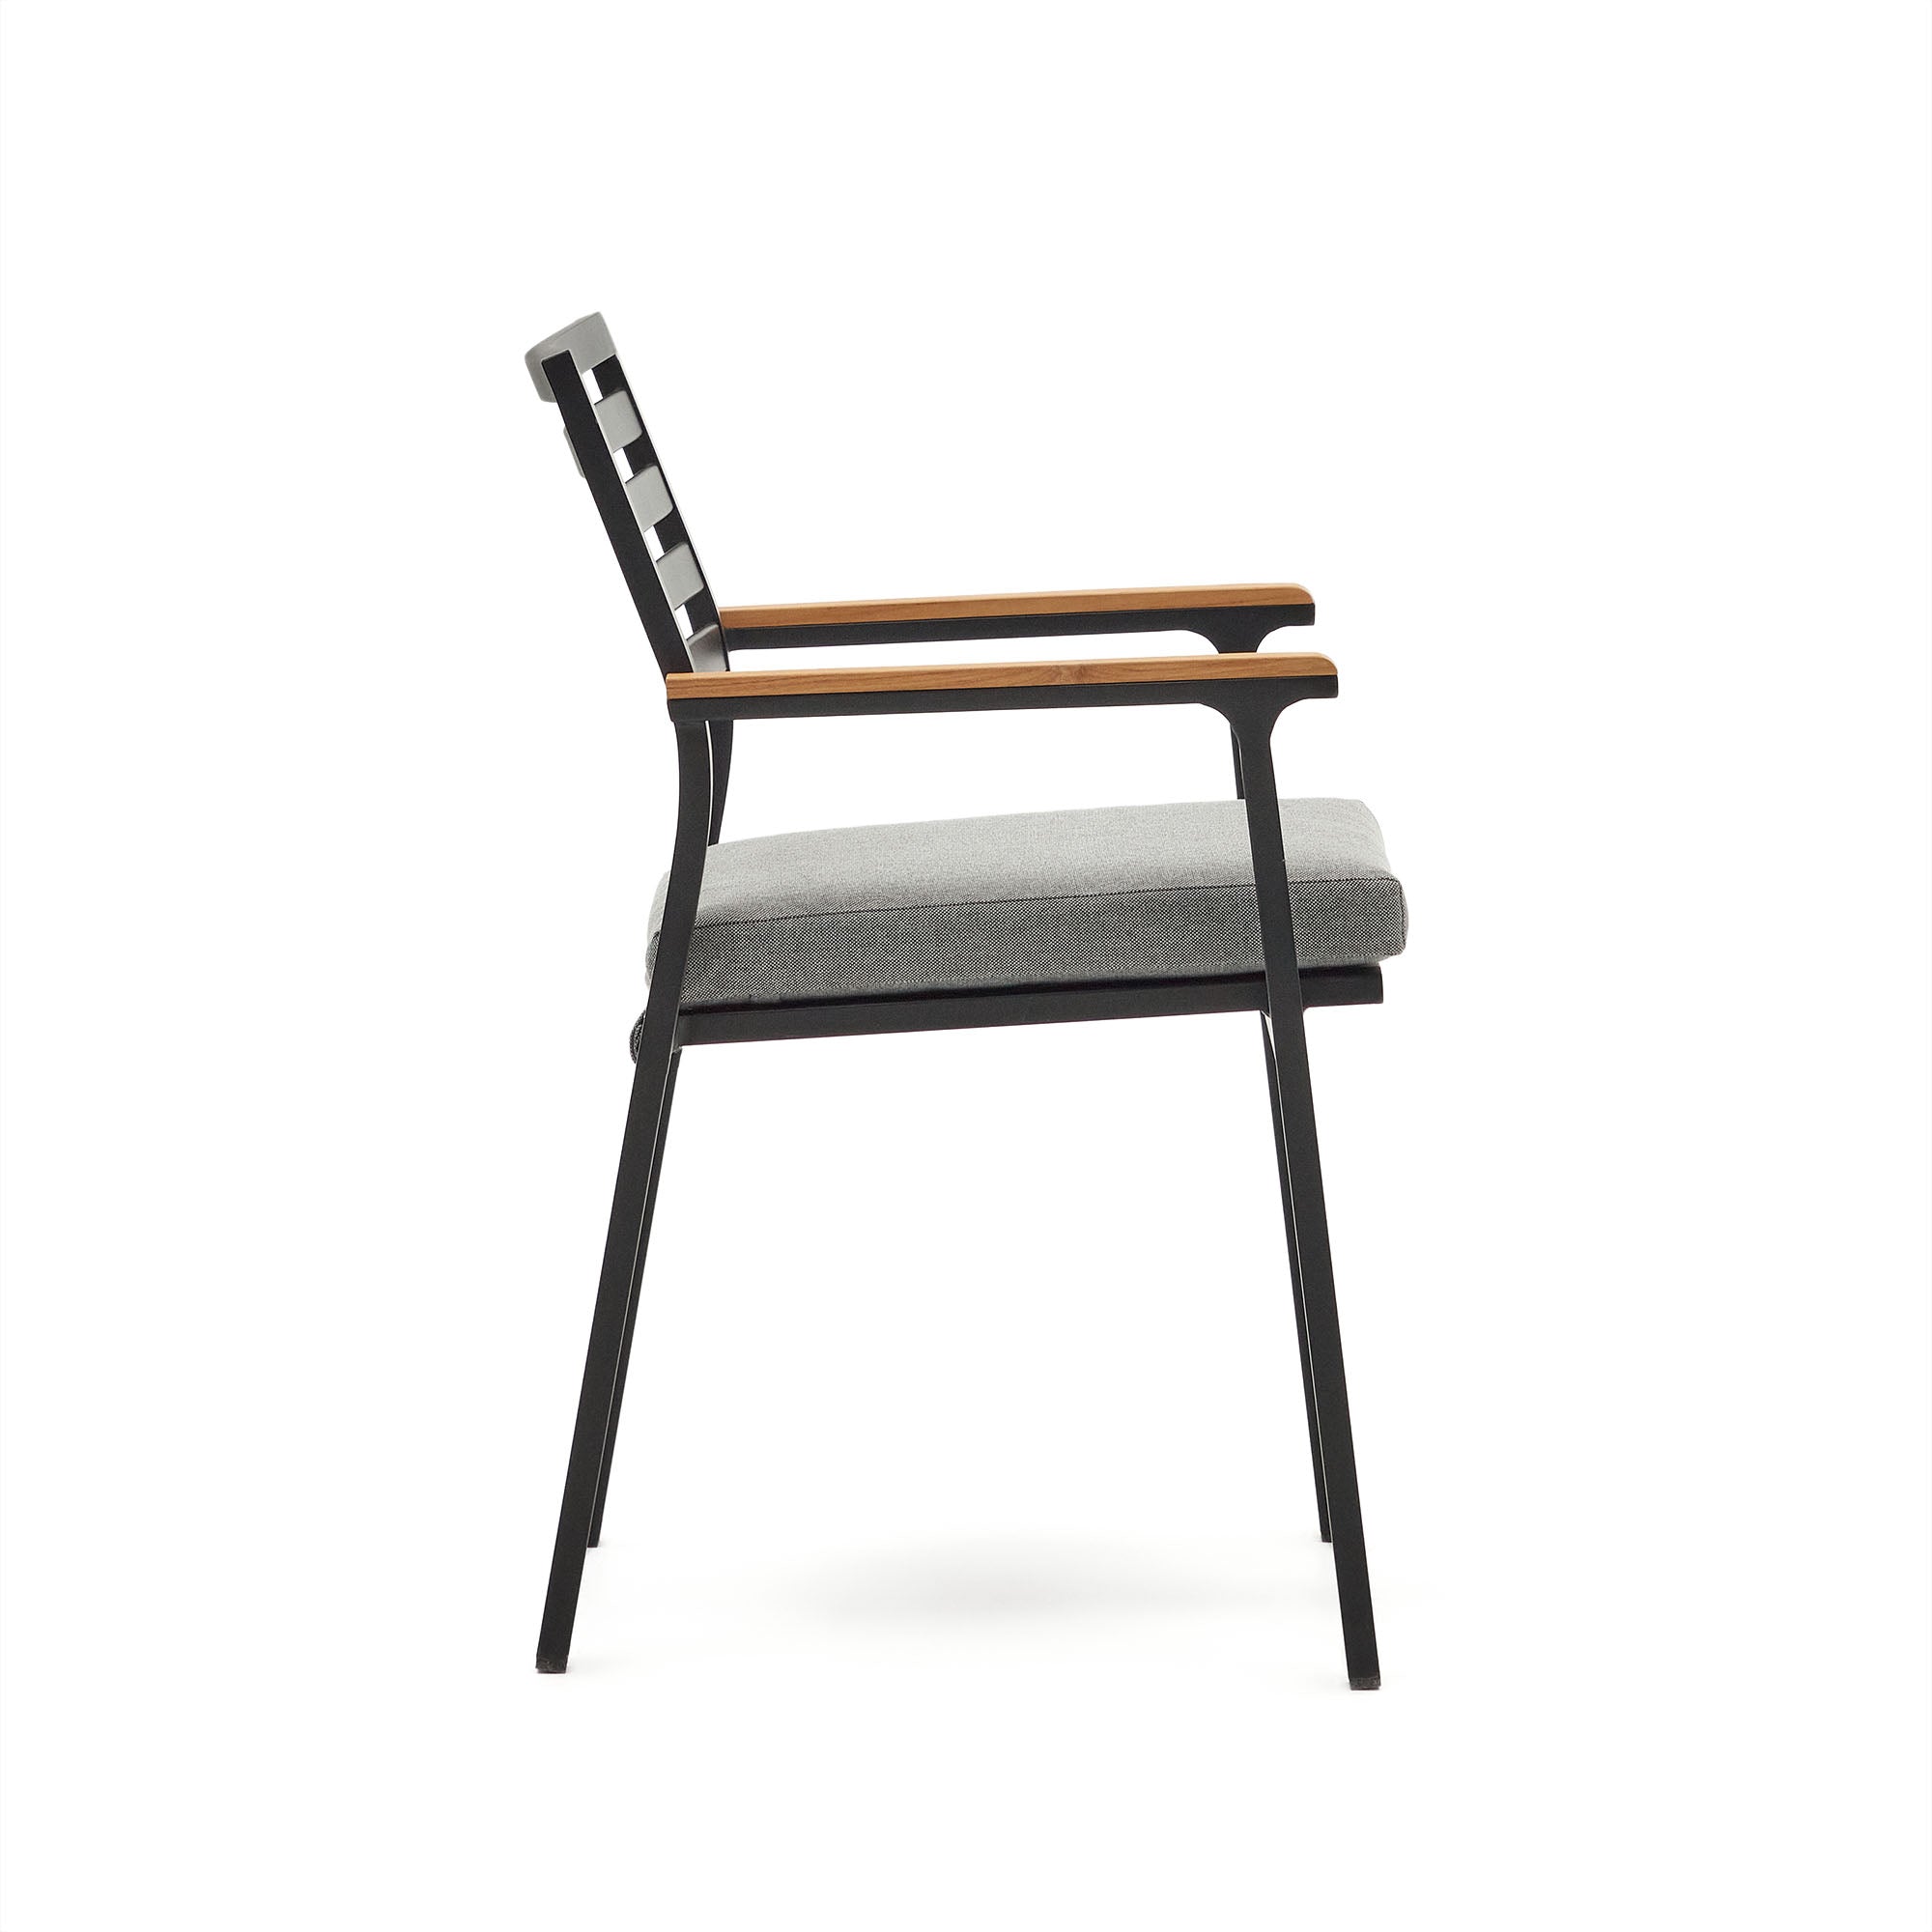 Bona stackable aluminium garden chair with a black finish and solid teak wood armrests